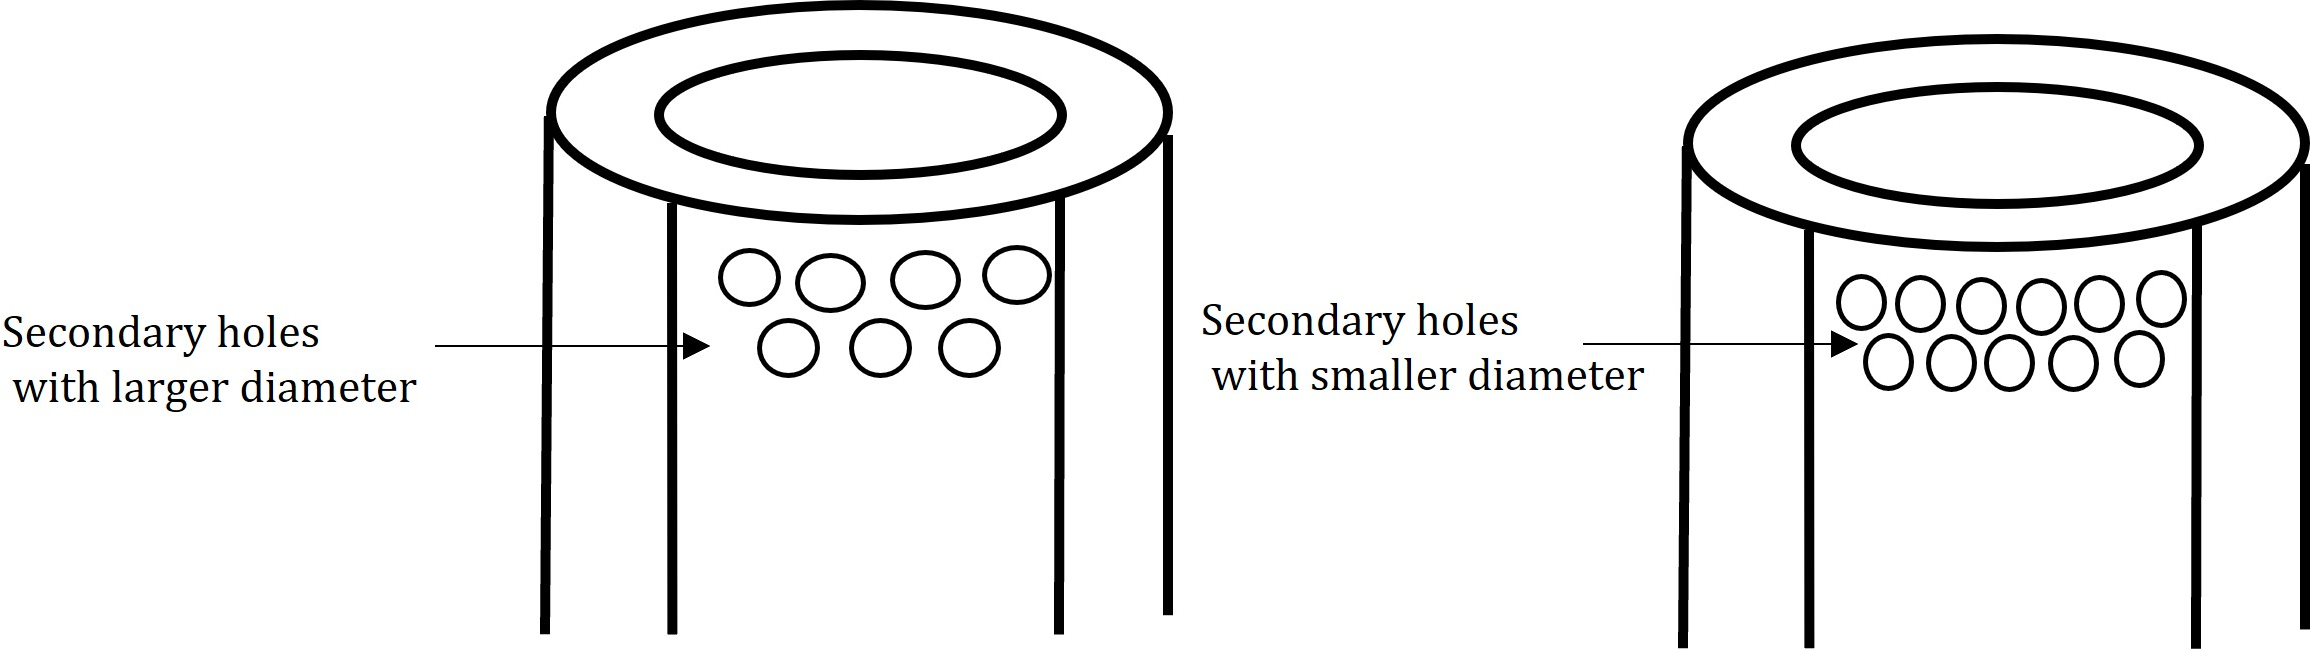 Secondary holes of the different laboratory-made gasifier cookstoves based on Himanshu et al. (2022) and Tyagi (2022)